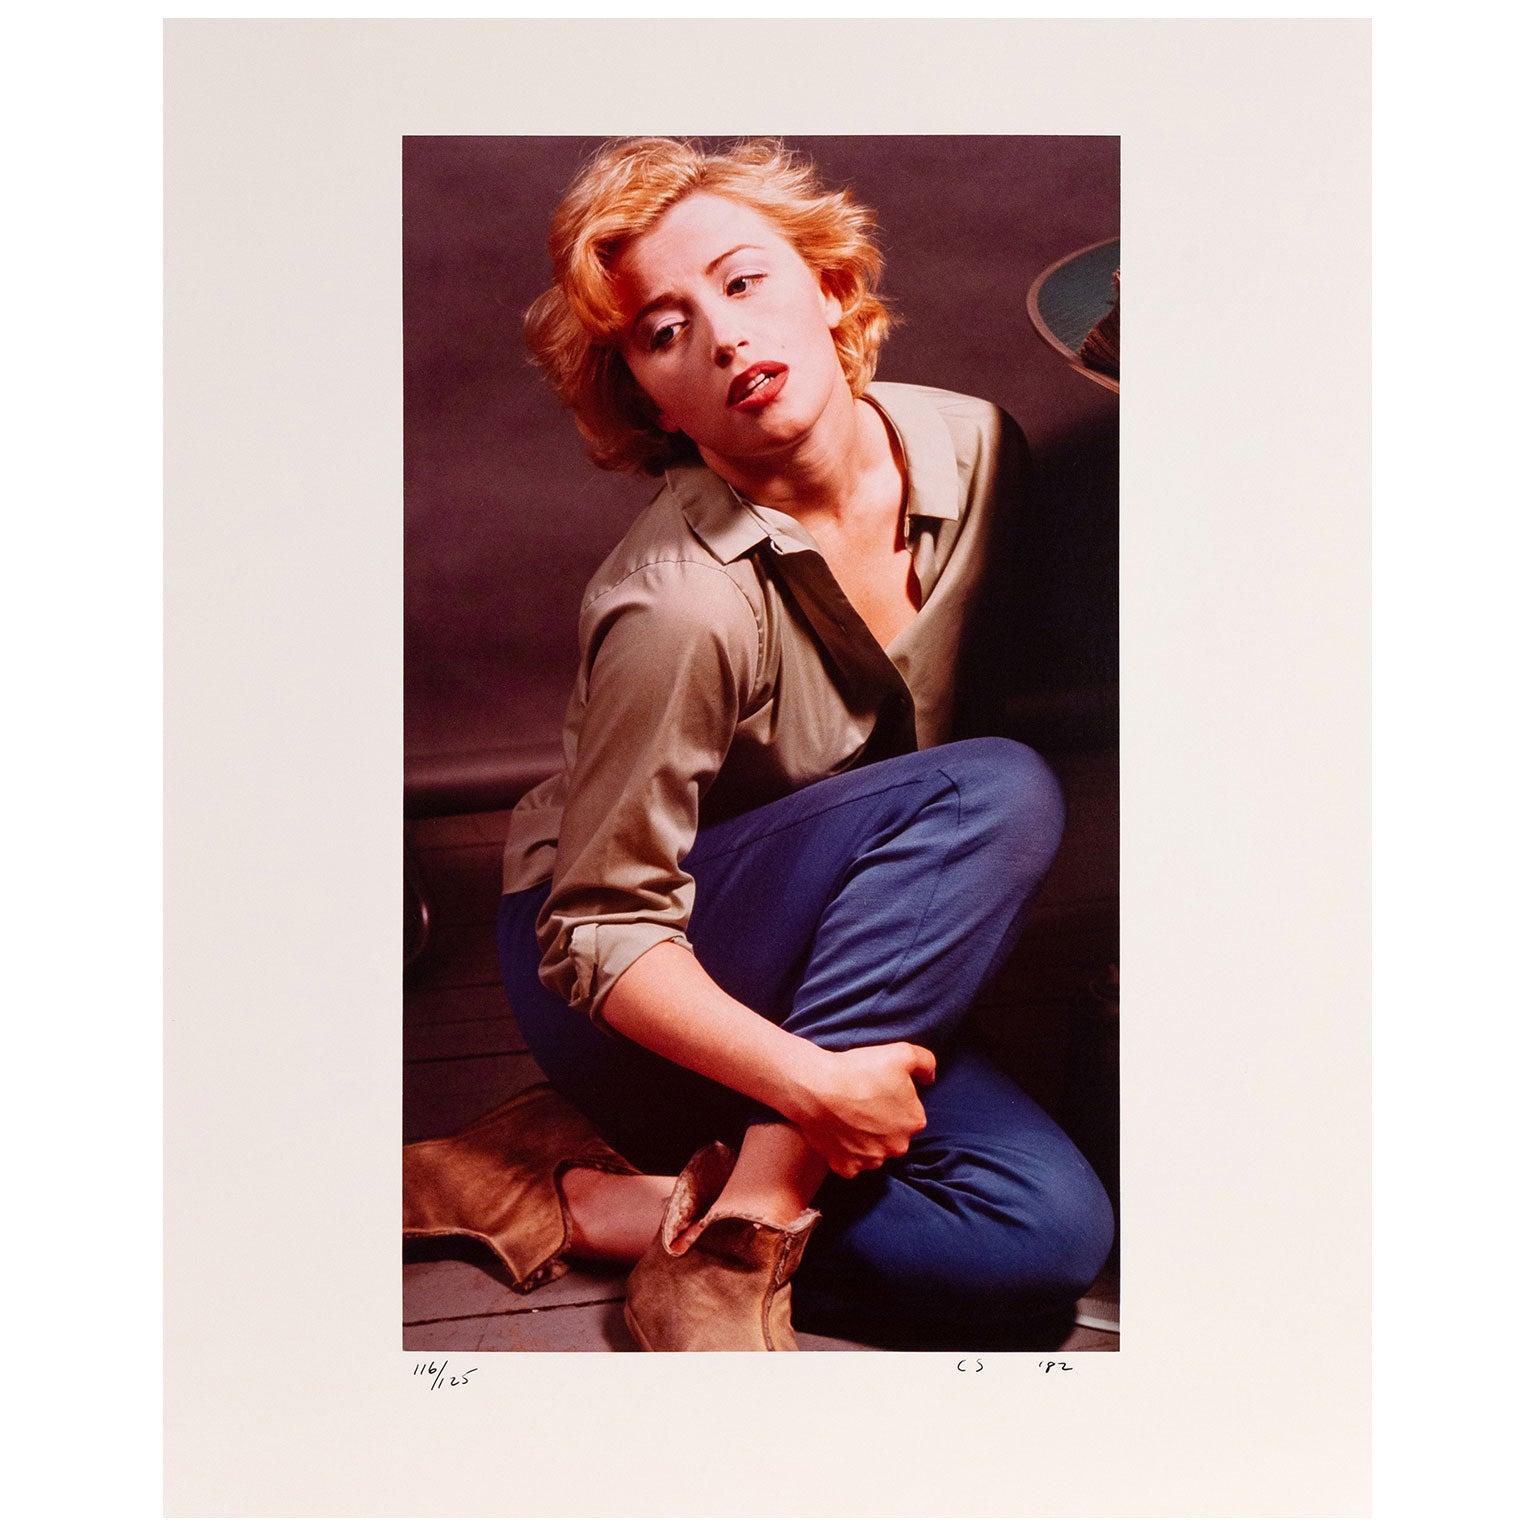 how is cindy sherman's untitled self-portrait of marilyn monroe characteristic of deconstruction